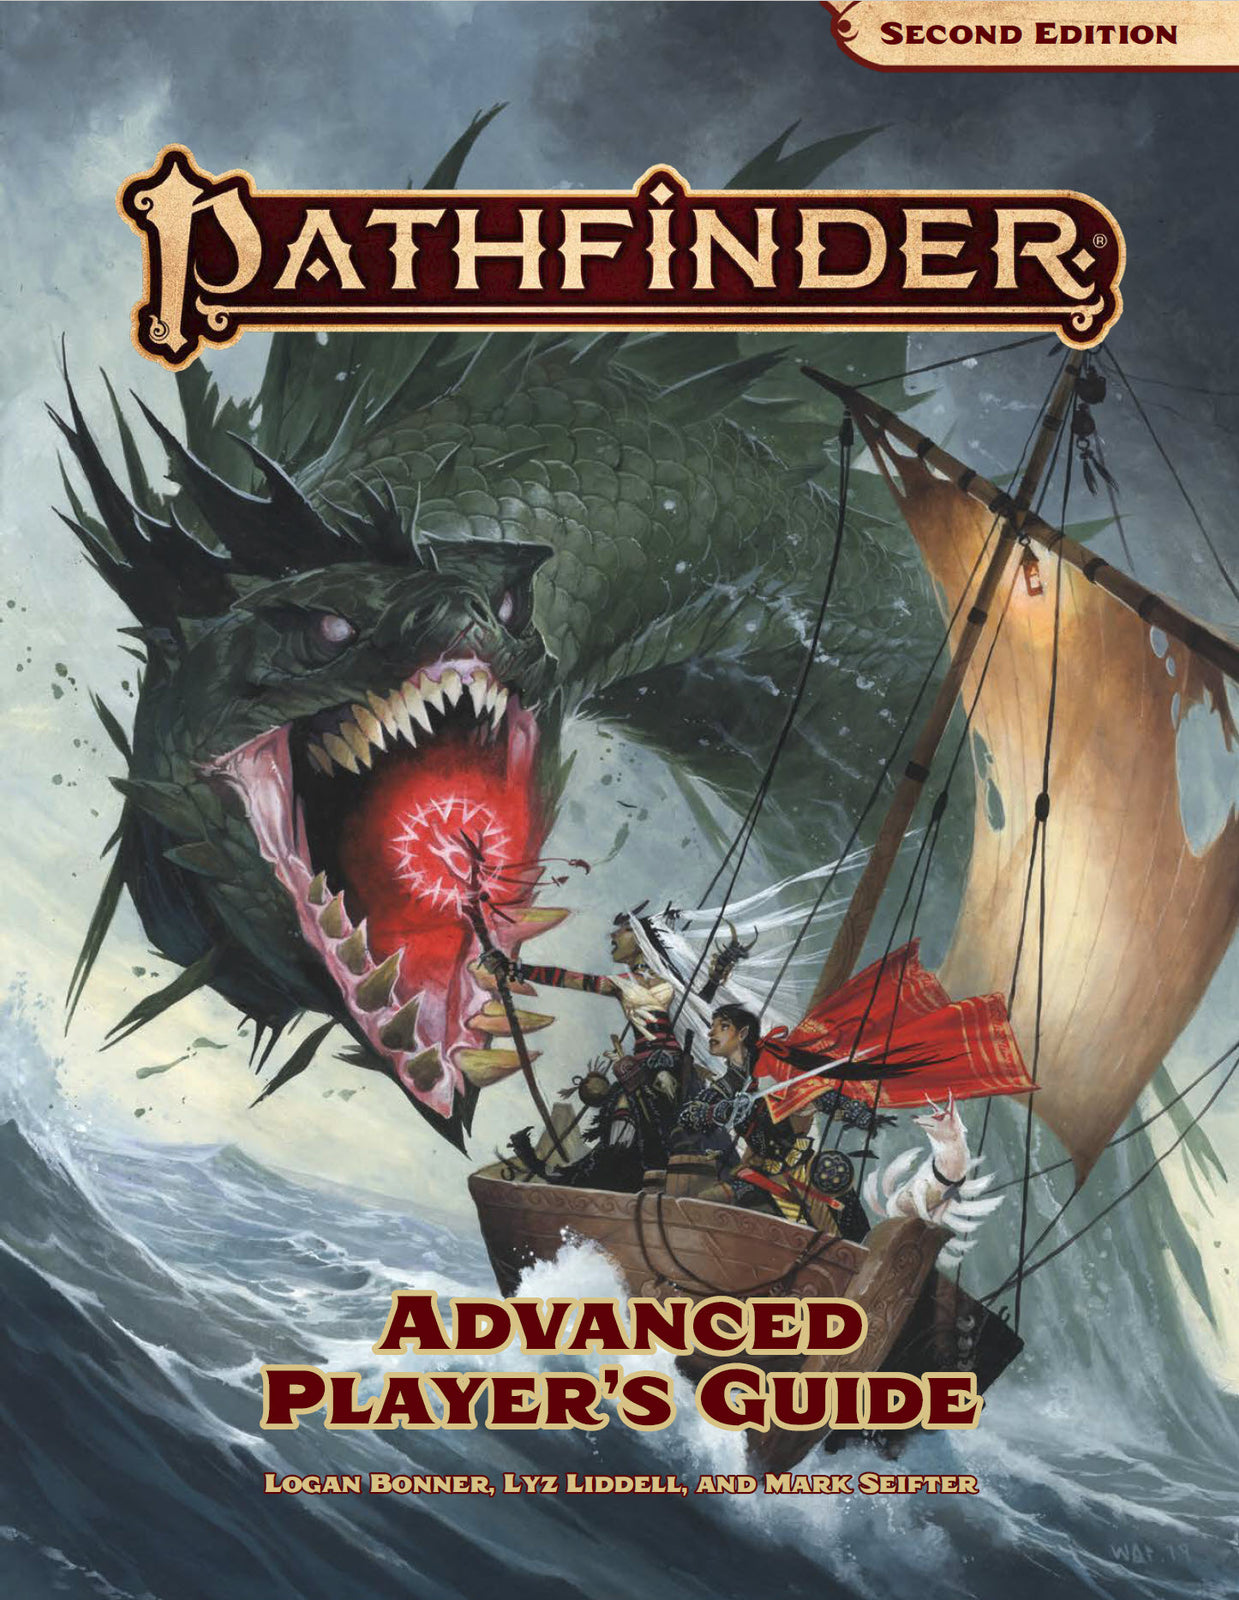 11 Amazing Resources for New Players Learning Pathfinder 2E 